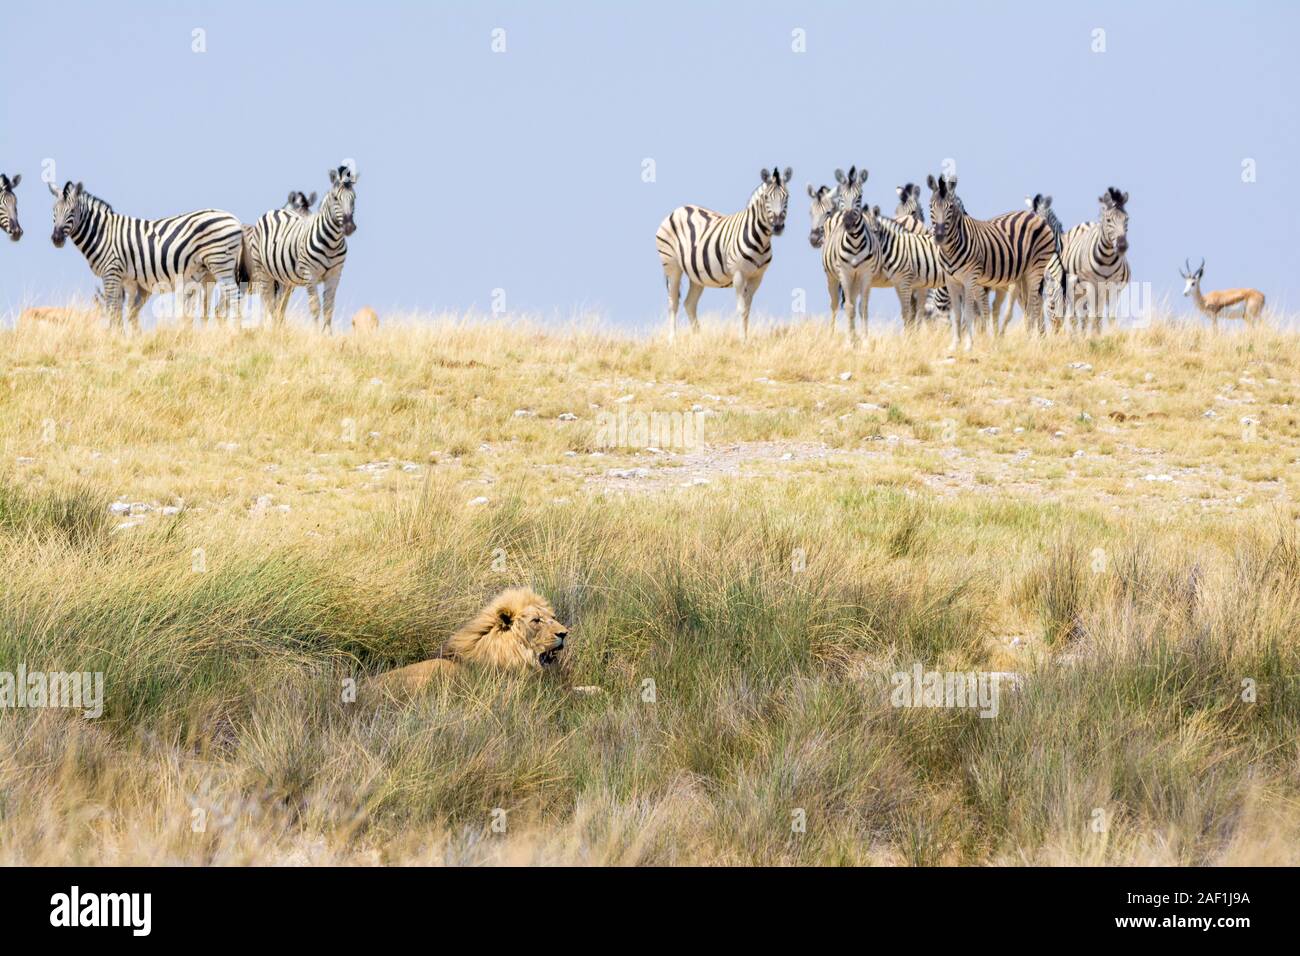 lion, Panthera leo, lying on the ground and a group of common zebras, Equus quagga, looking at eat and beeing cautious Stock Photo